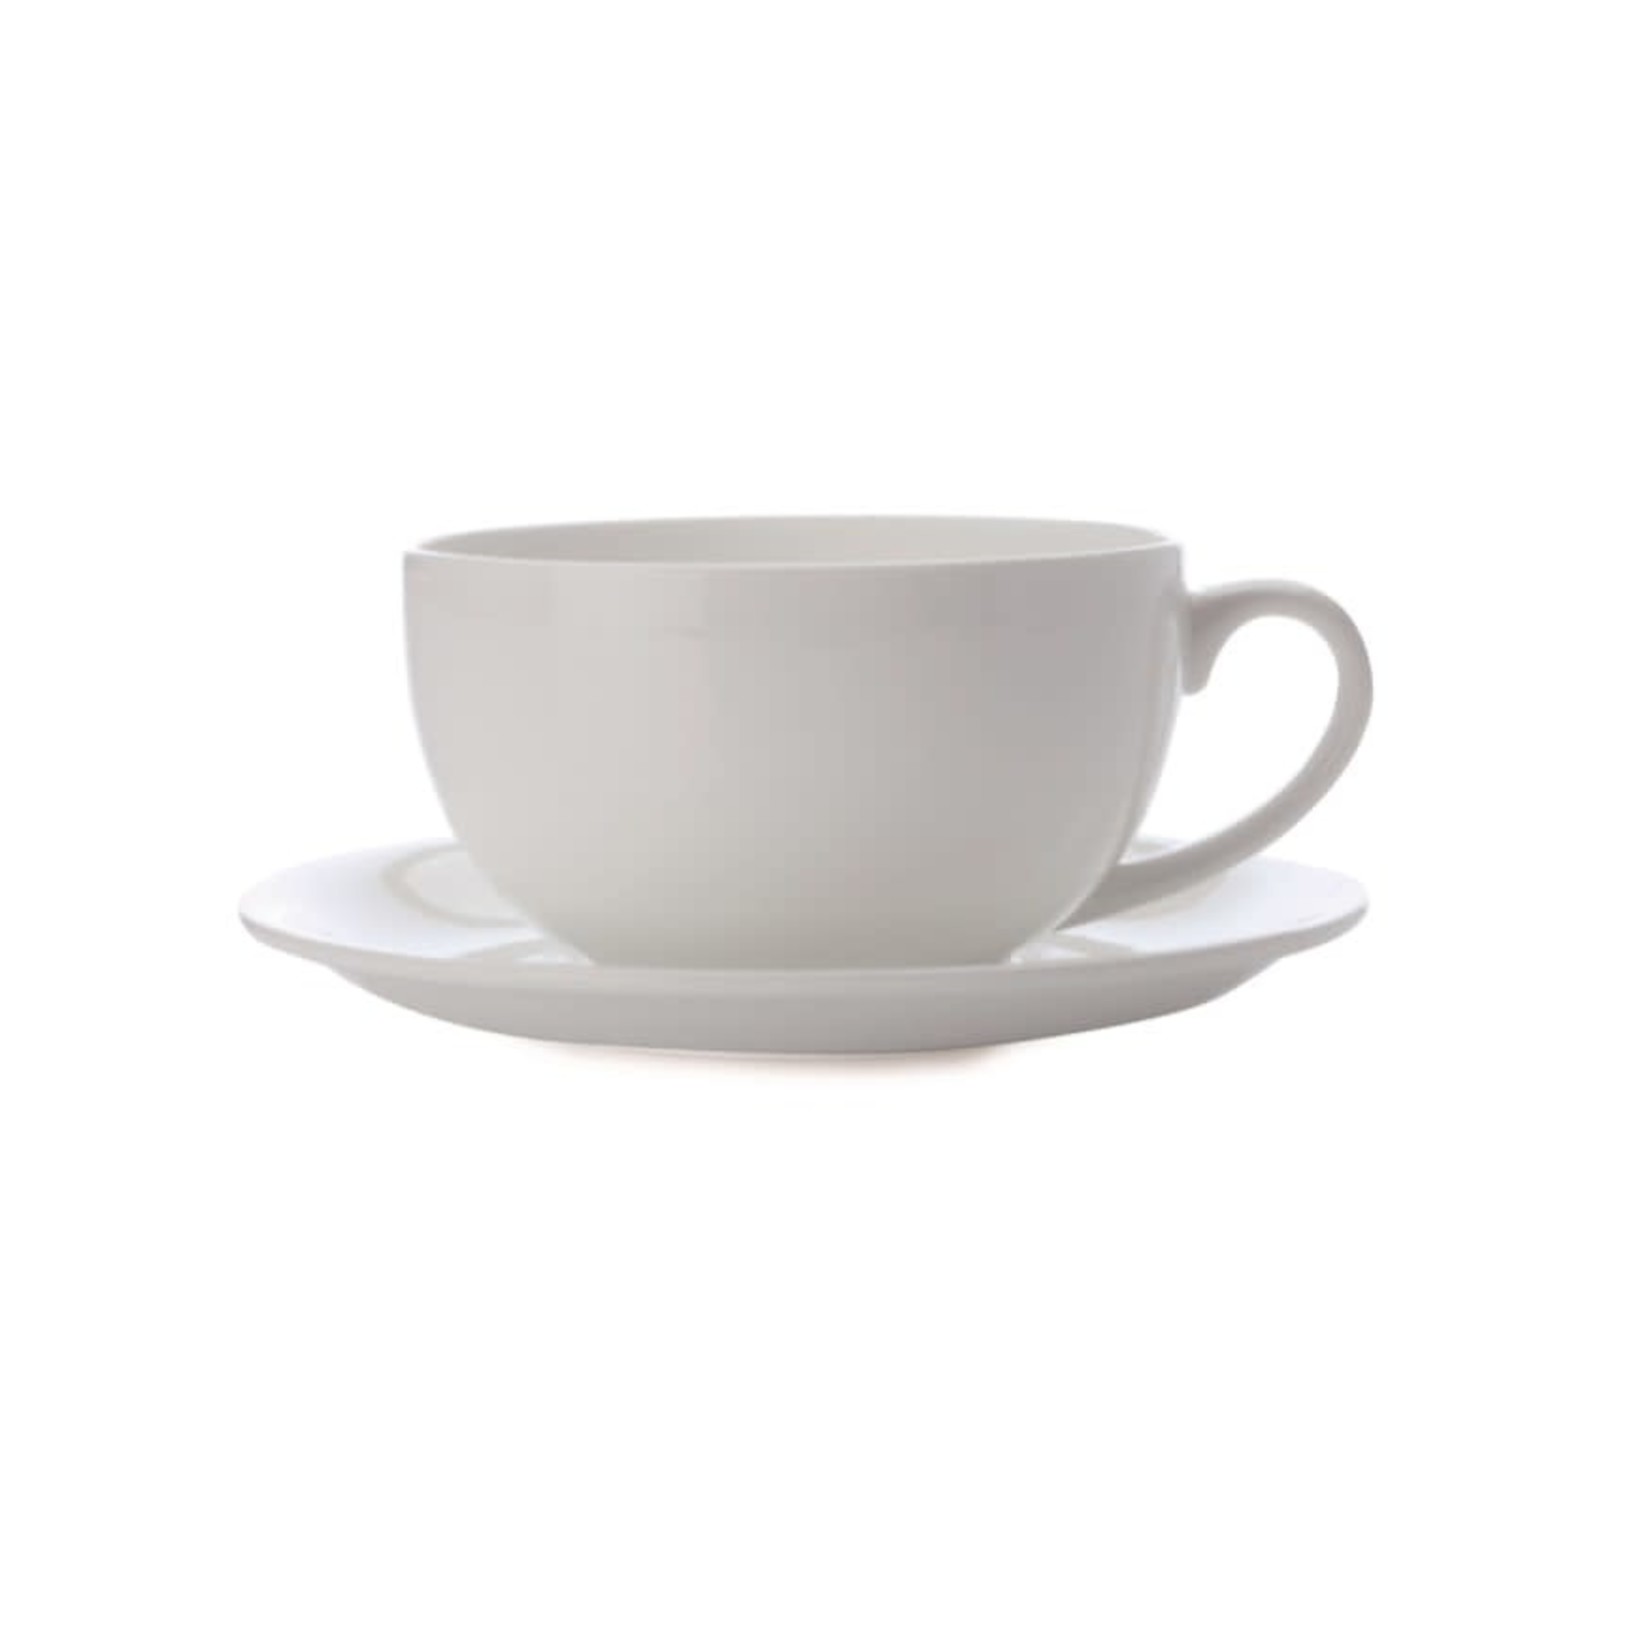 MAXWELL WILLIAMS MAXWELL WILLIAMS Cashmere Cappuccino Cup & Saucer